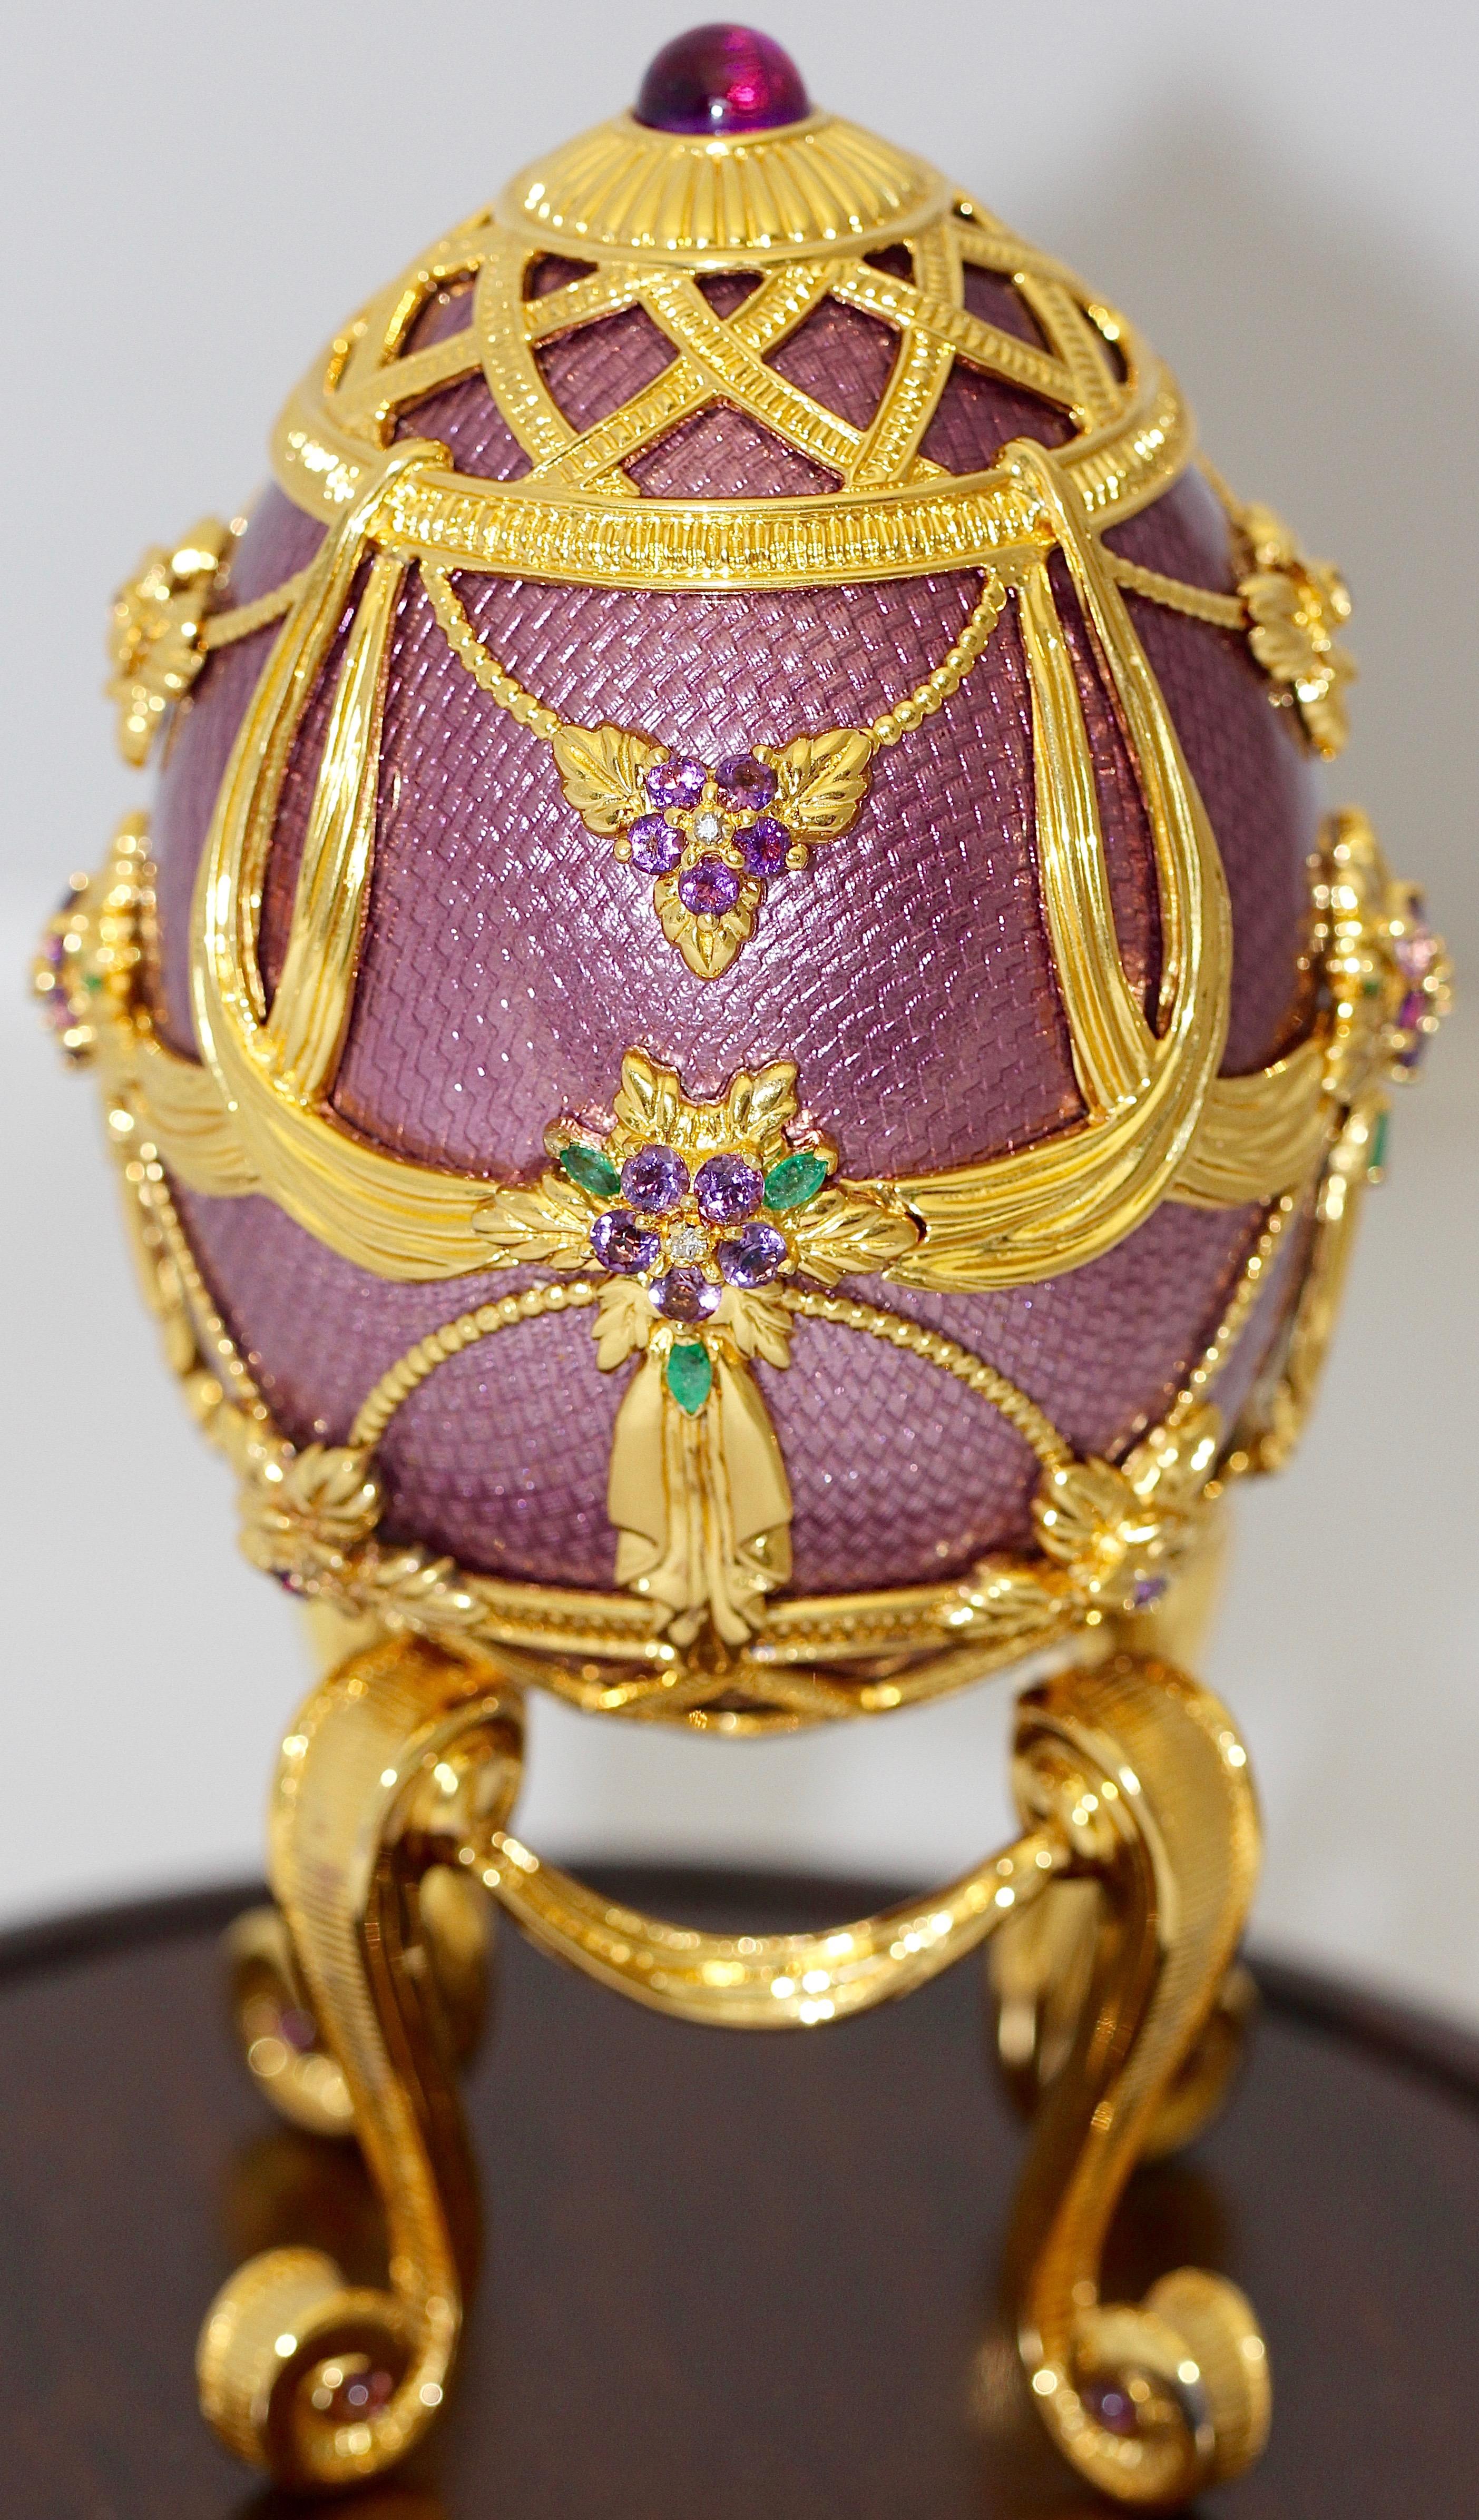 Extremely rare collector and lover object. This model was produced in a tiny number and only for selected customers.

House of Faberge JEWELED STERLING SILVER Egg set with Enamel, Diamonds, Emeralds and Amethysts.

Gold Plated & Sterling Silver.